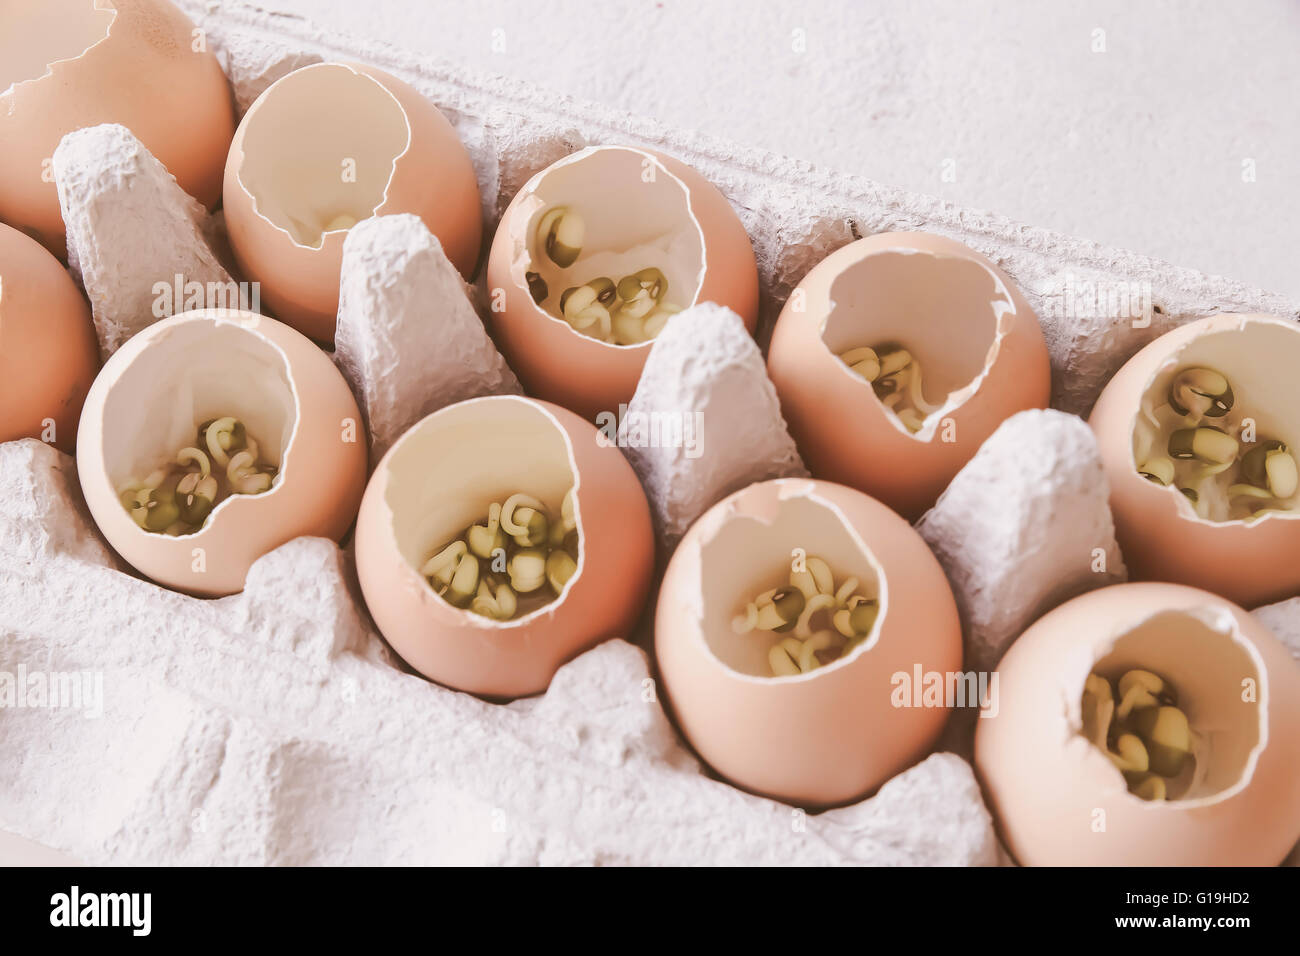 young plants in eggshells, eco concept Stock Photo